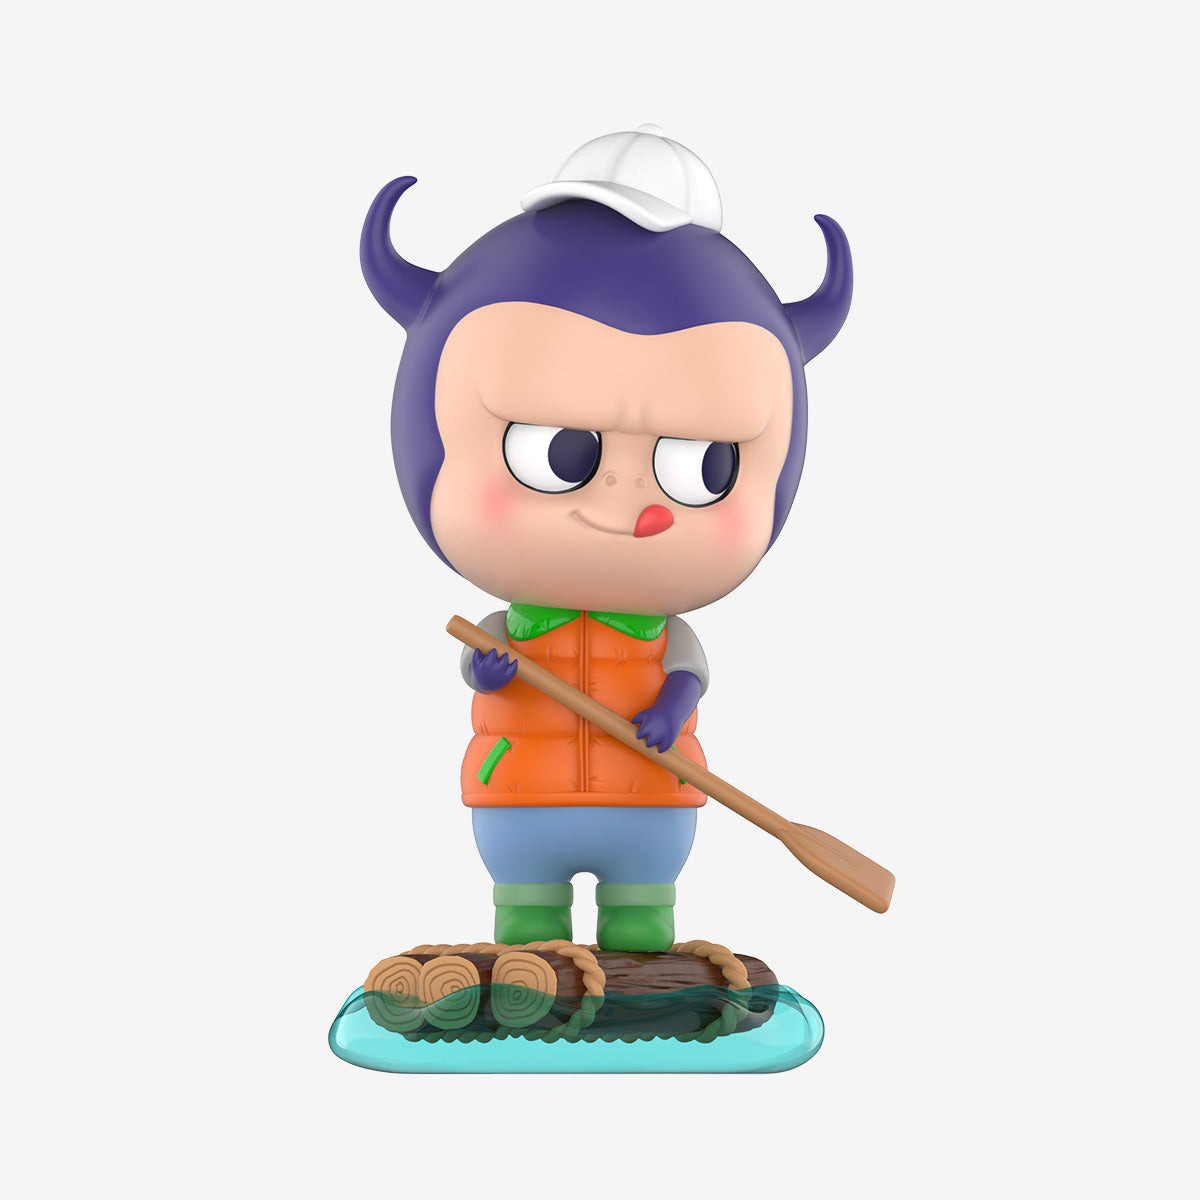 【Restock】Pop Mart The Monsters Camping Series Blind Box Figure